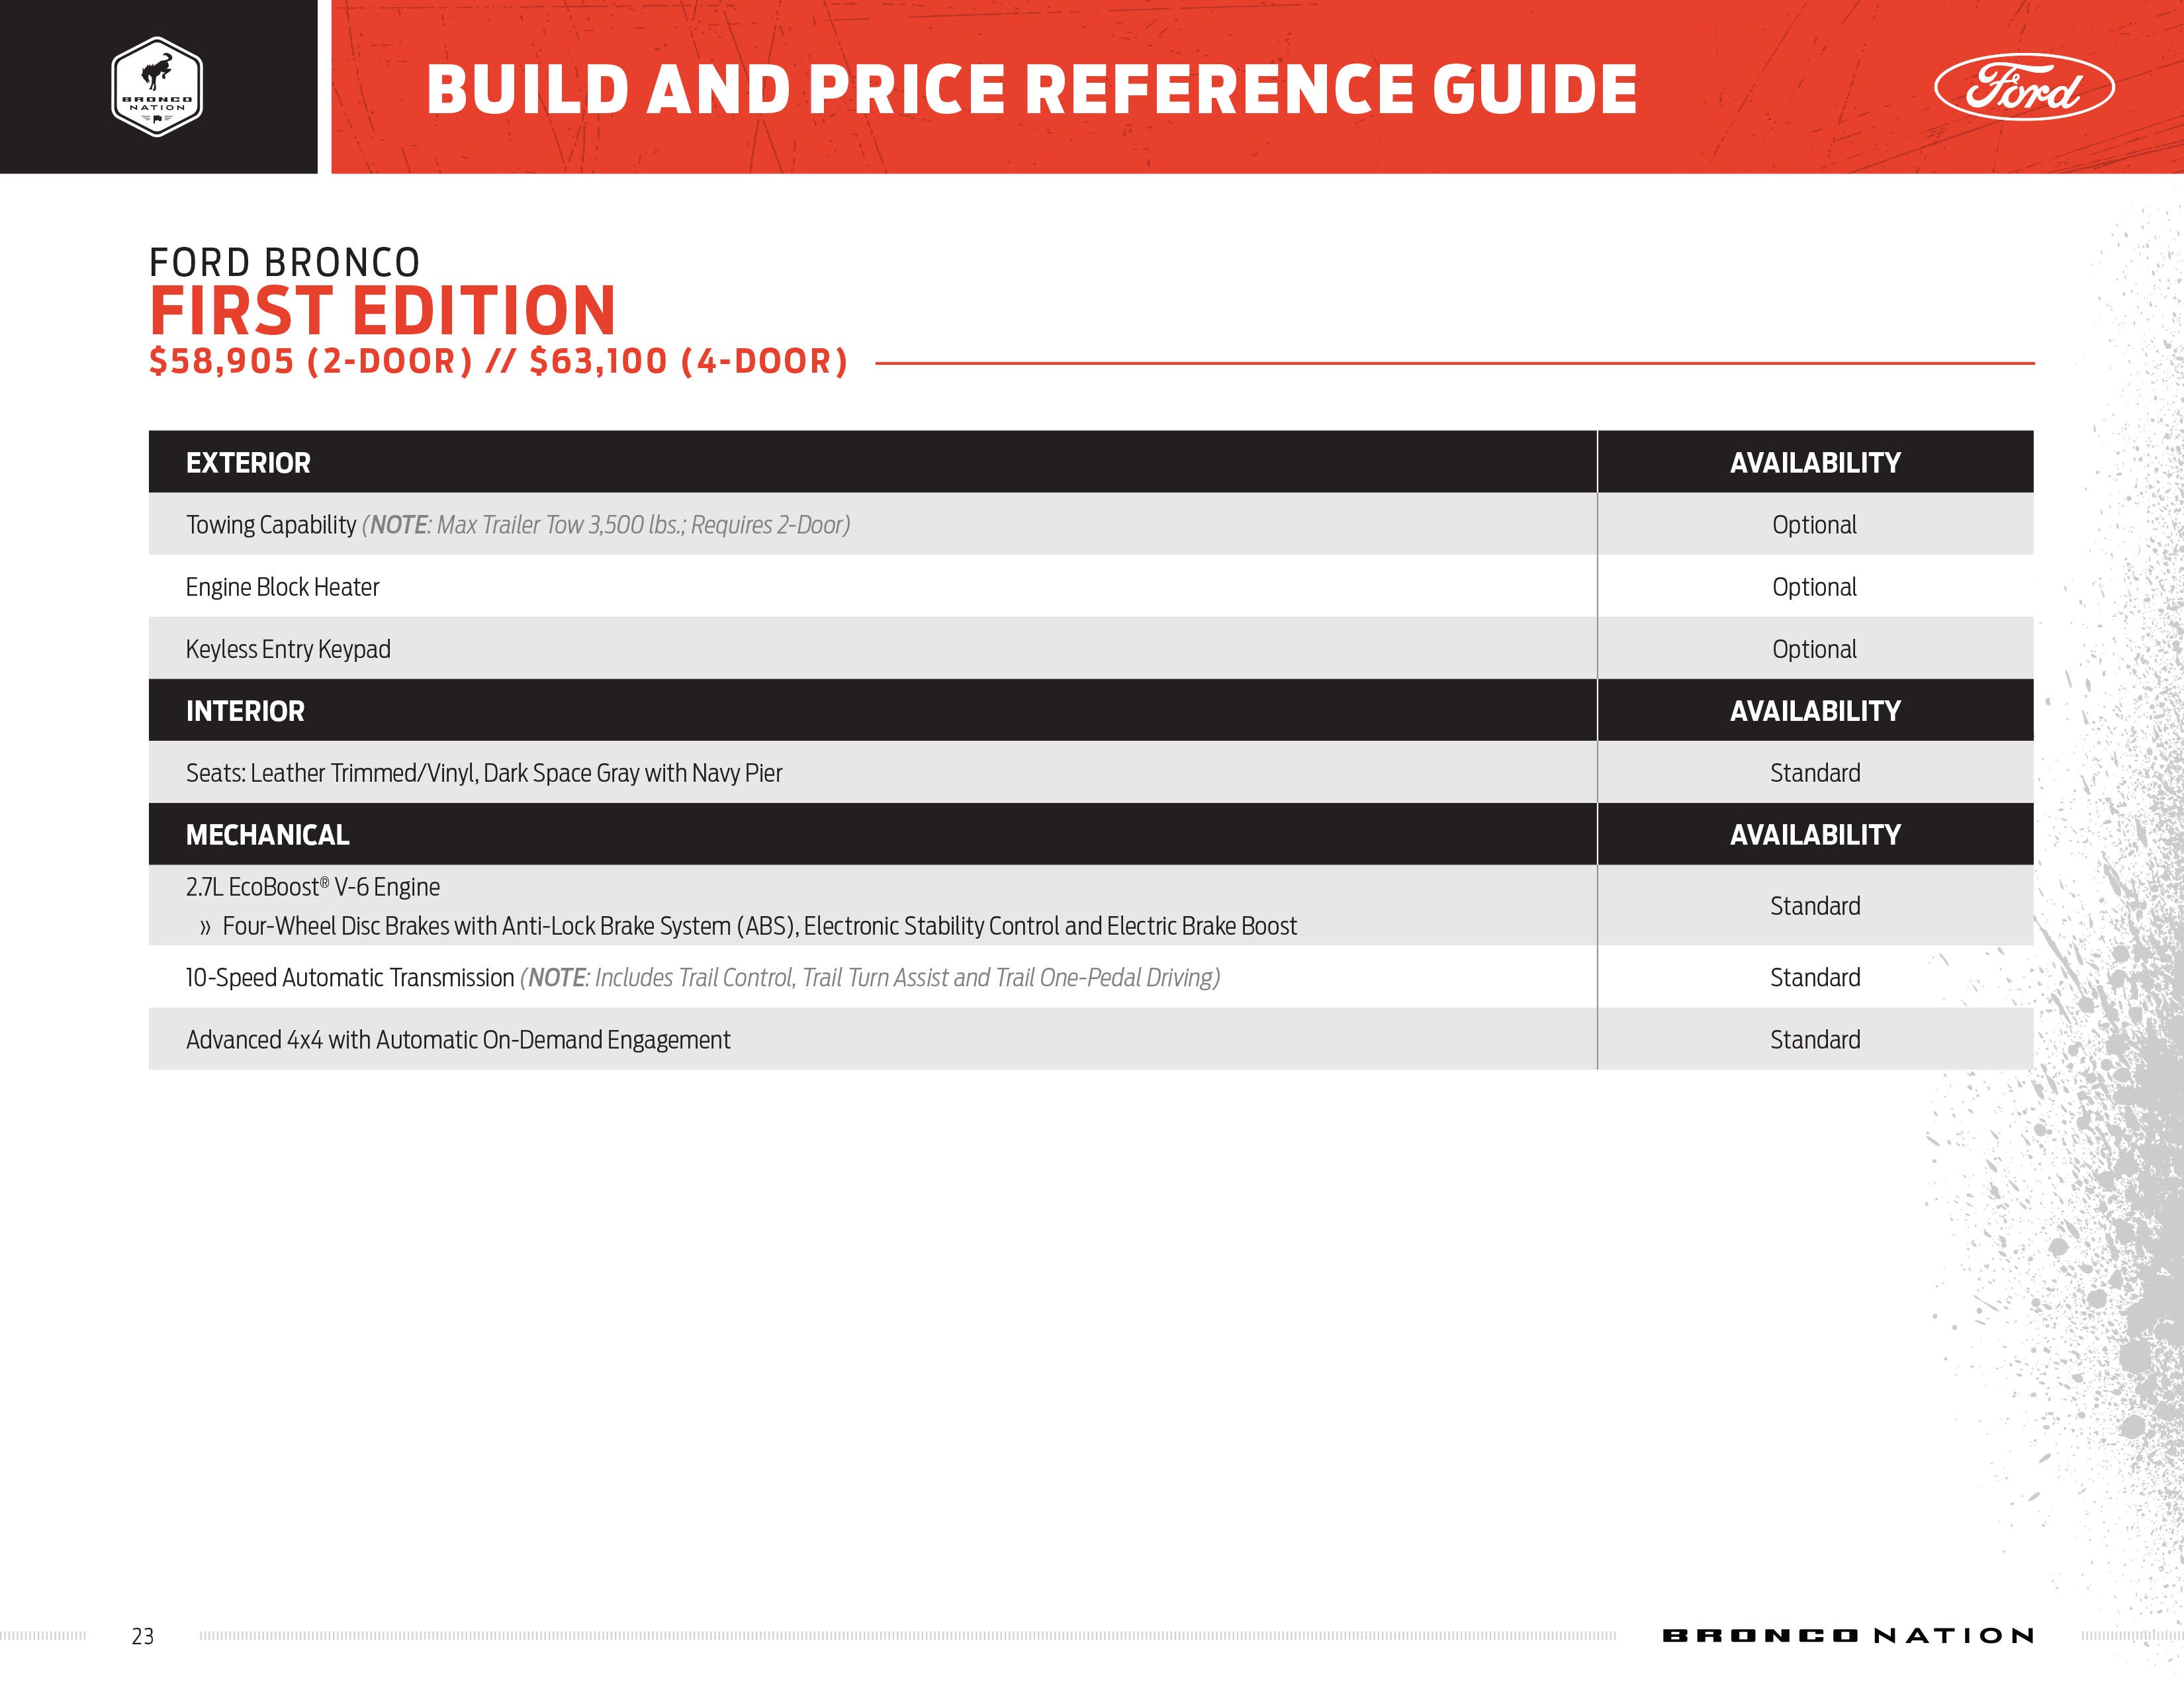 Bronco Build and Price Guide Page 23